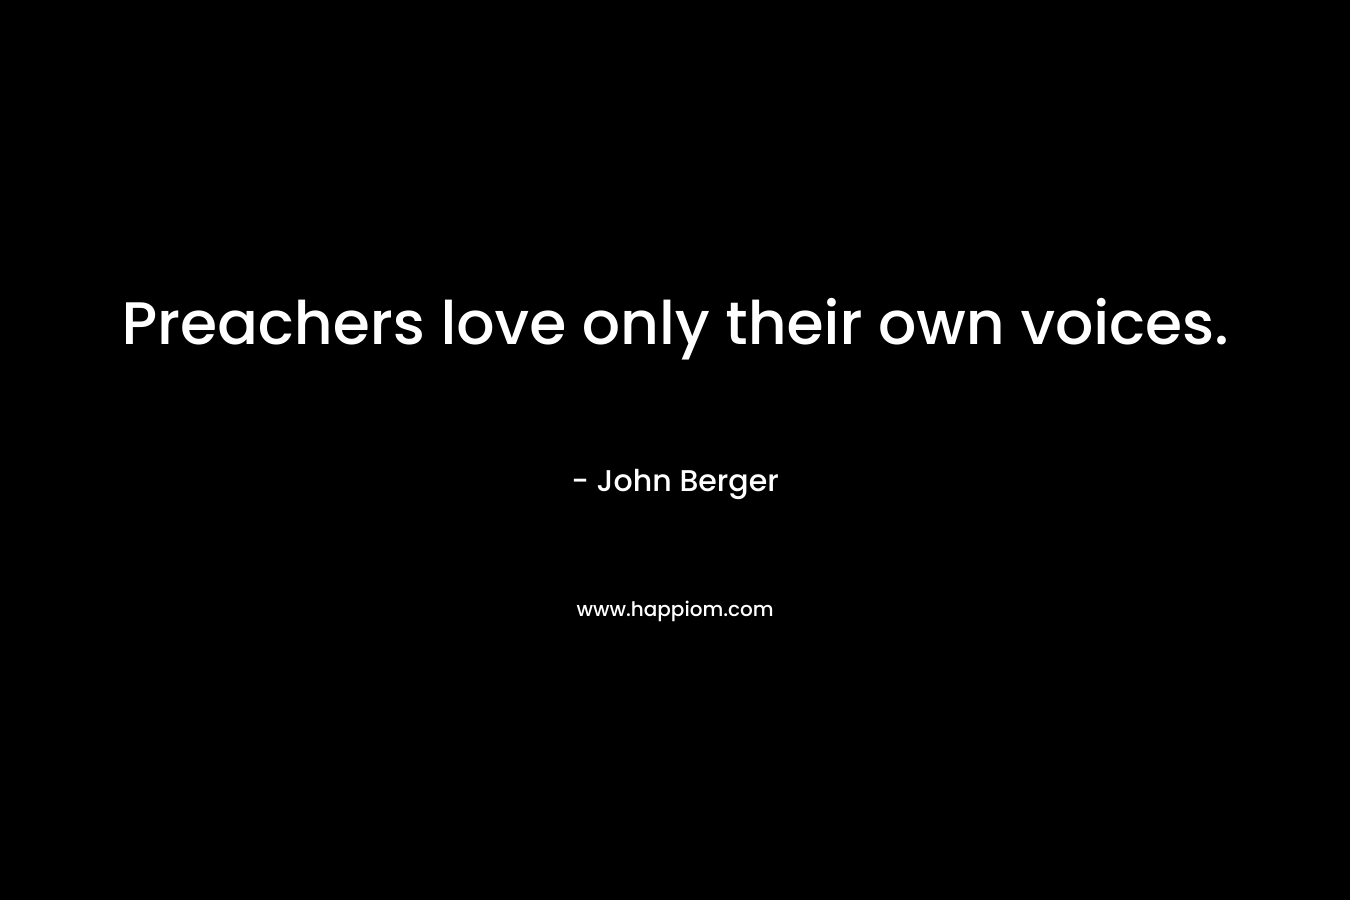 Preachers love only their own voices. – John Berger